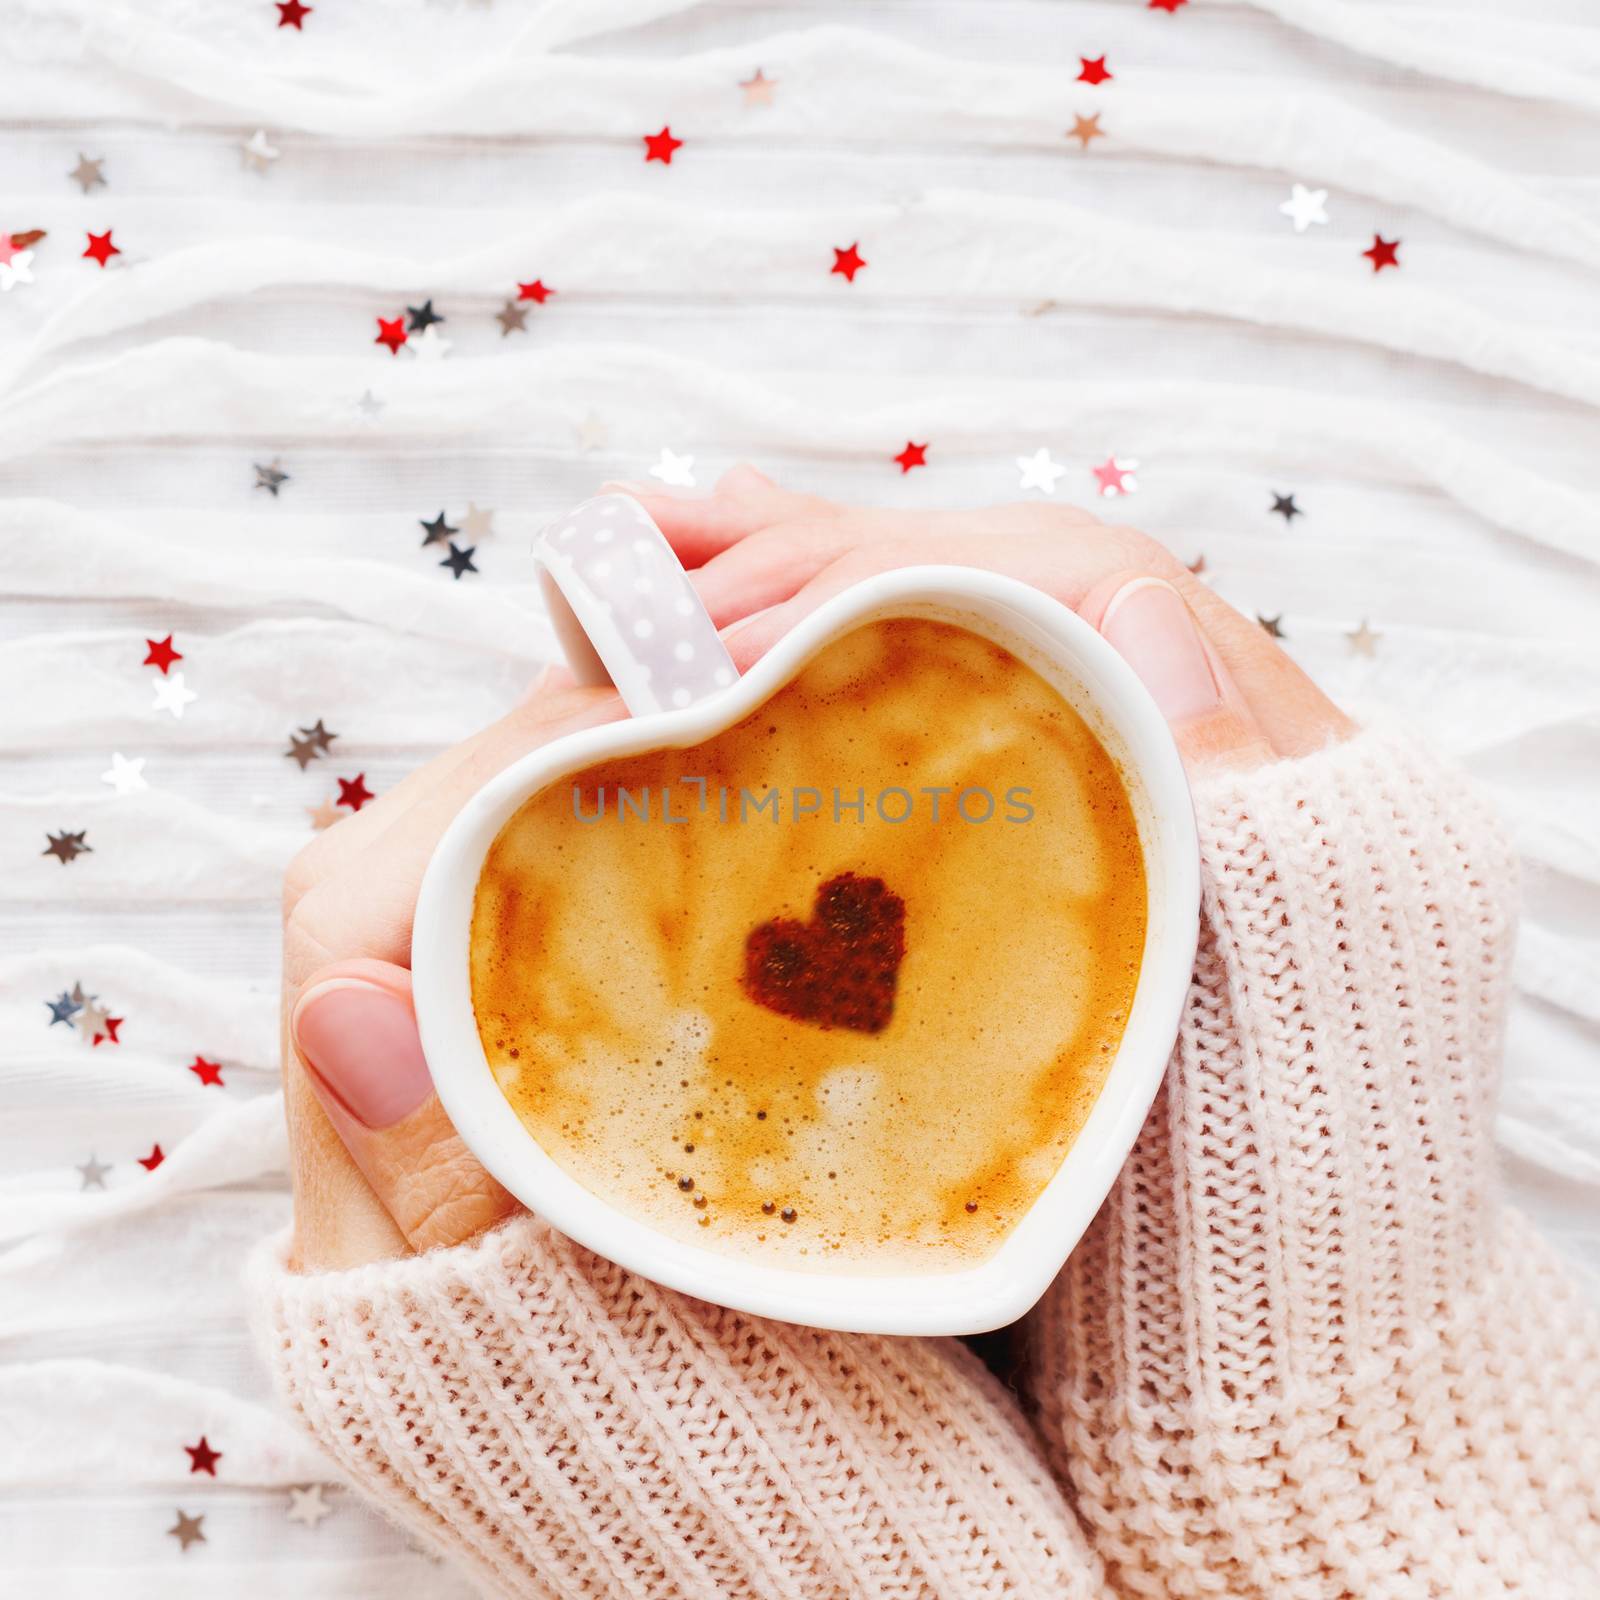 Woman holds a cup of hot coffee with cinnamon heart. Winter and Valentine's Day fabric background with sparkling silver and red confetti.